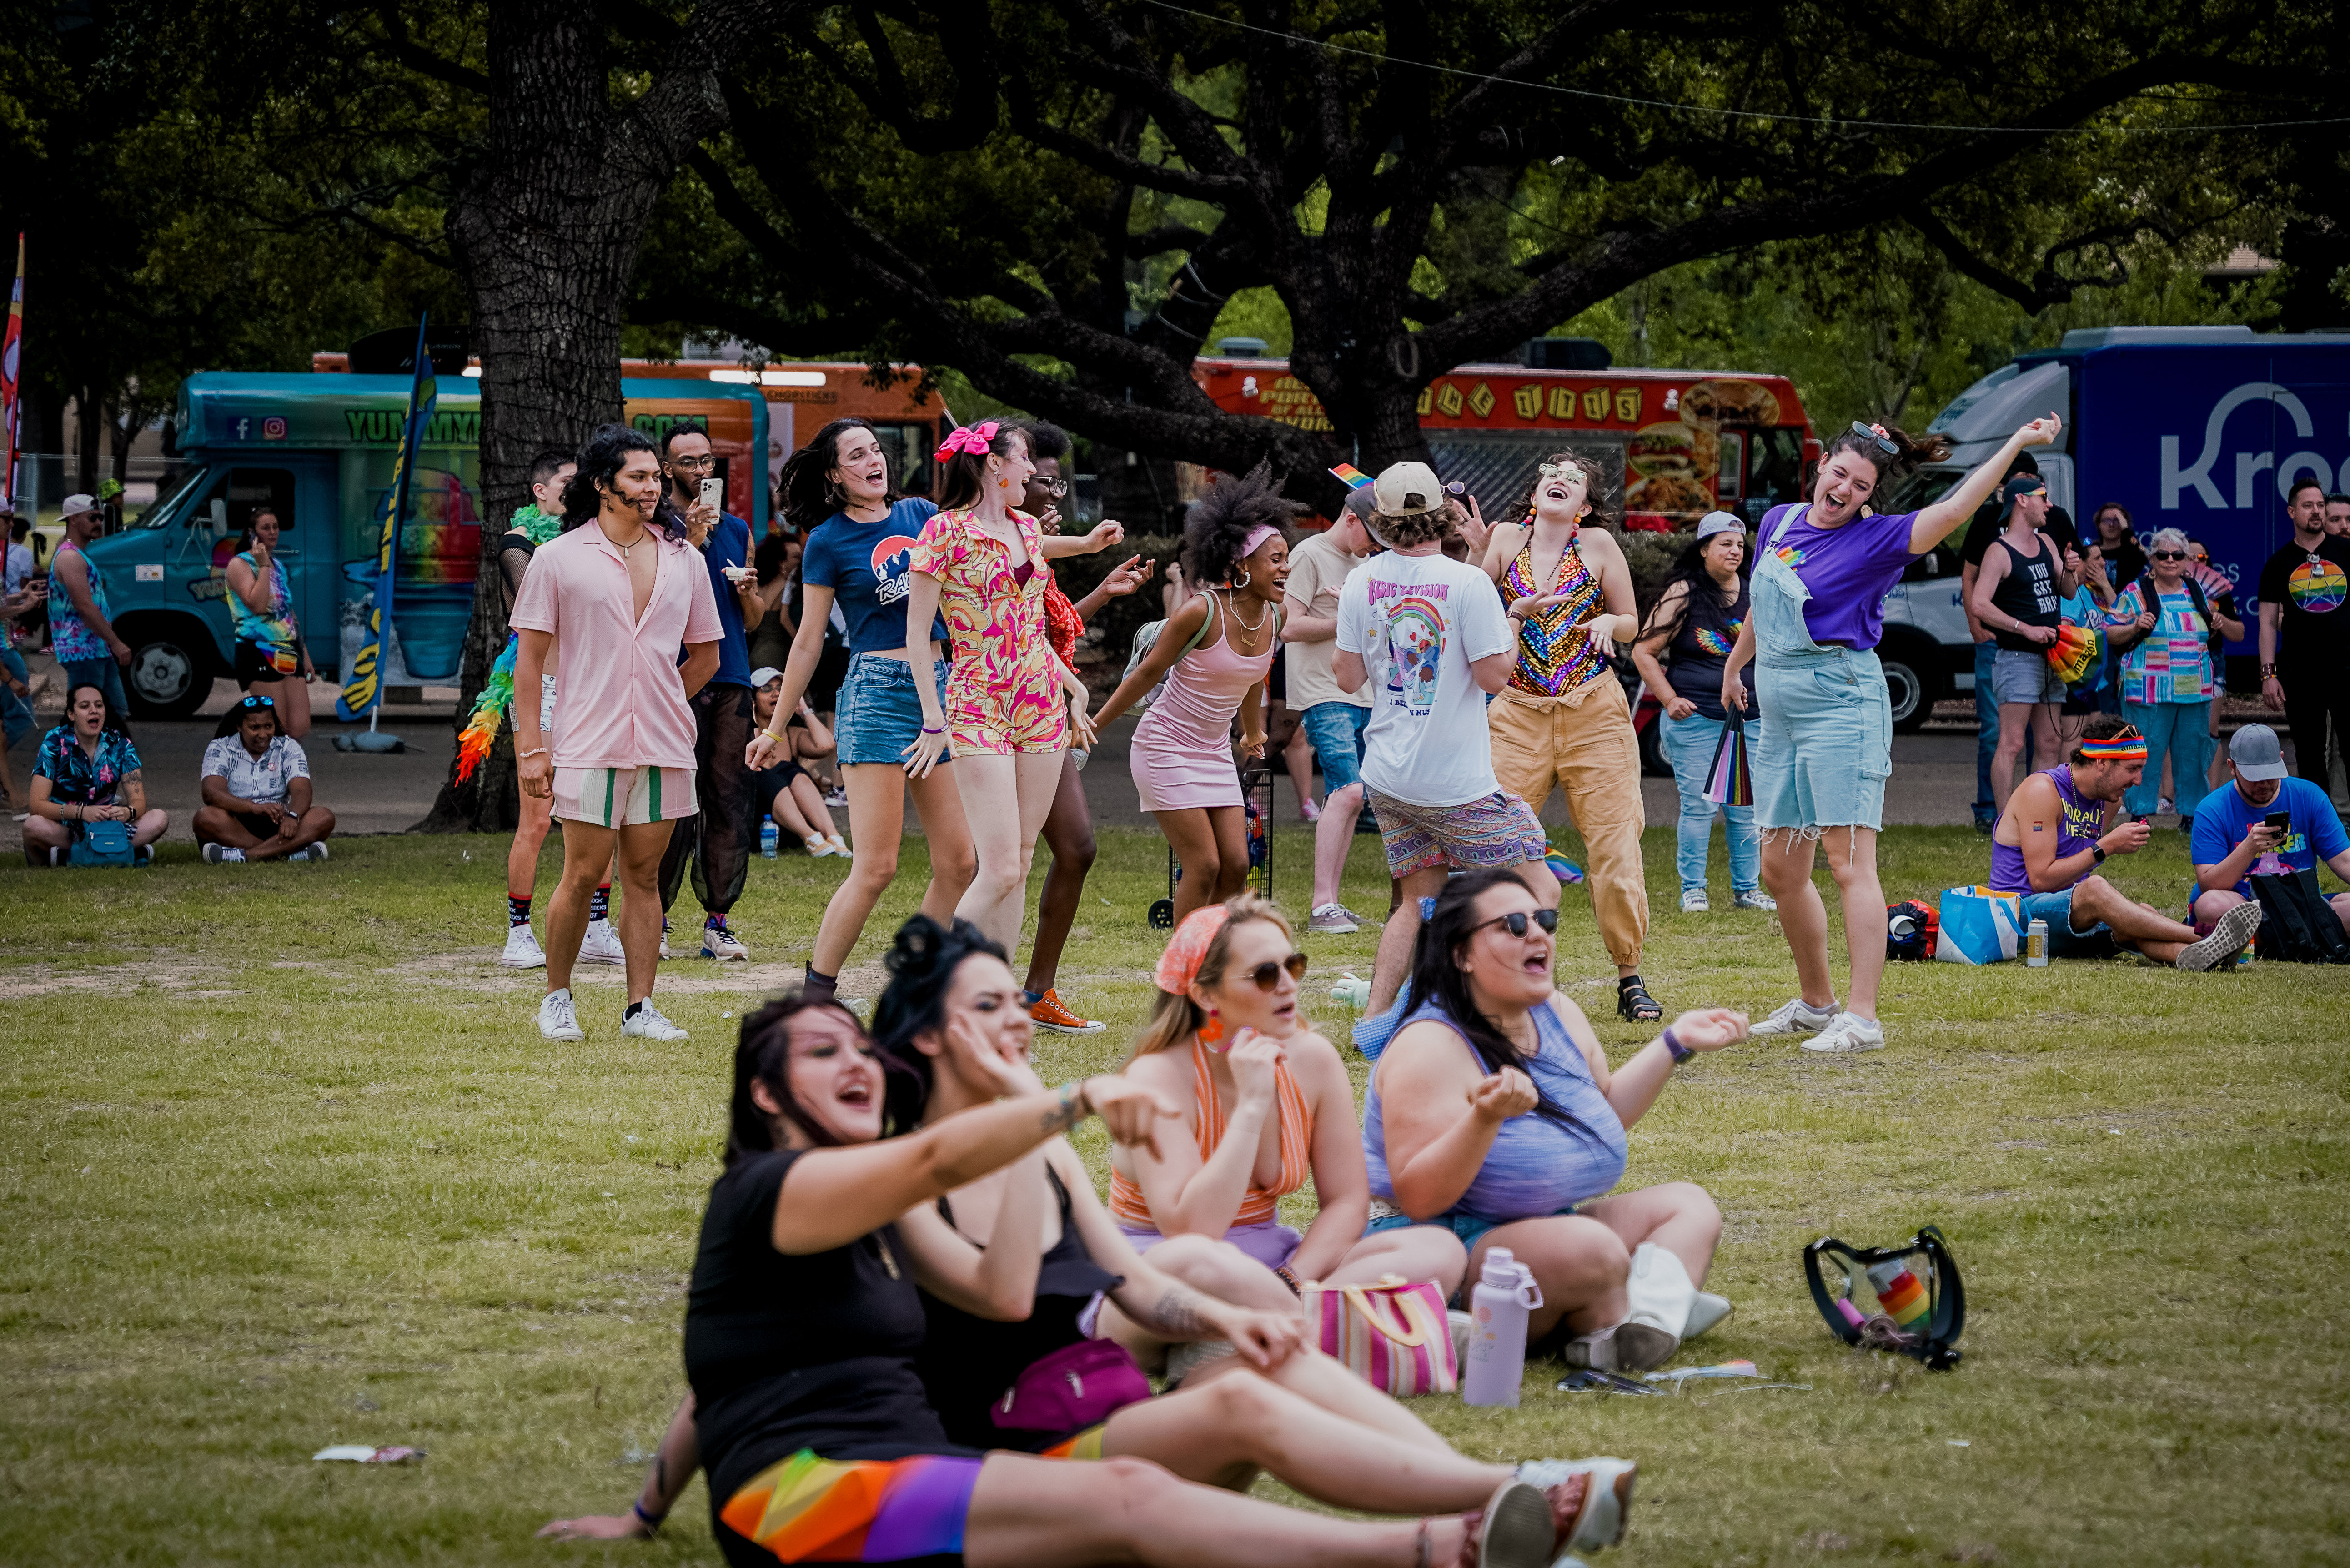 A group of people dancing on grass